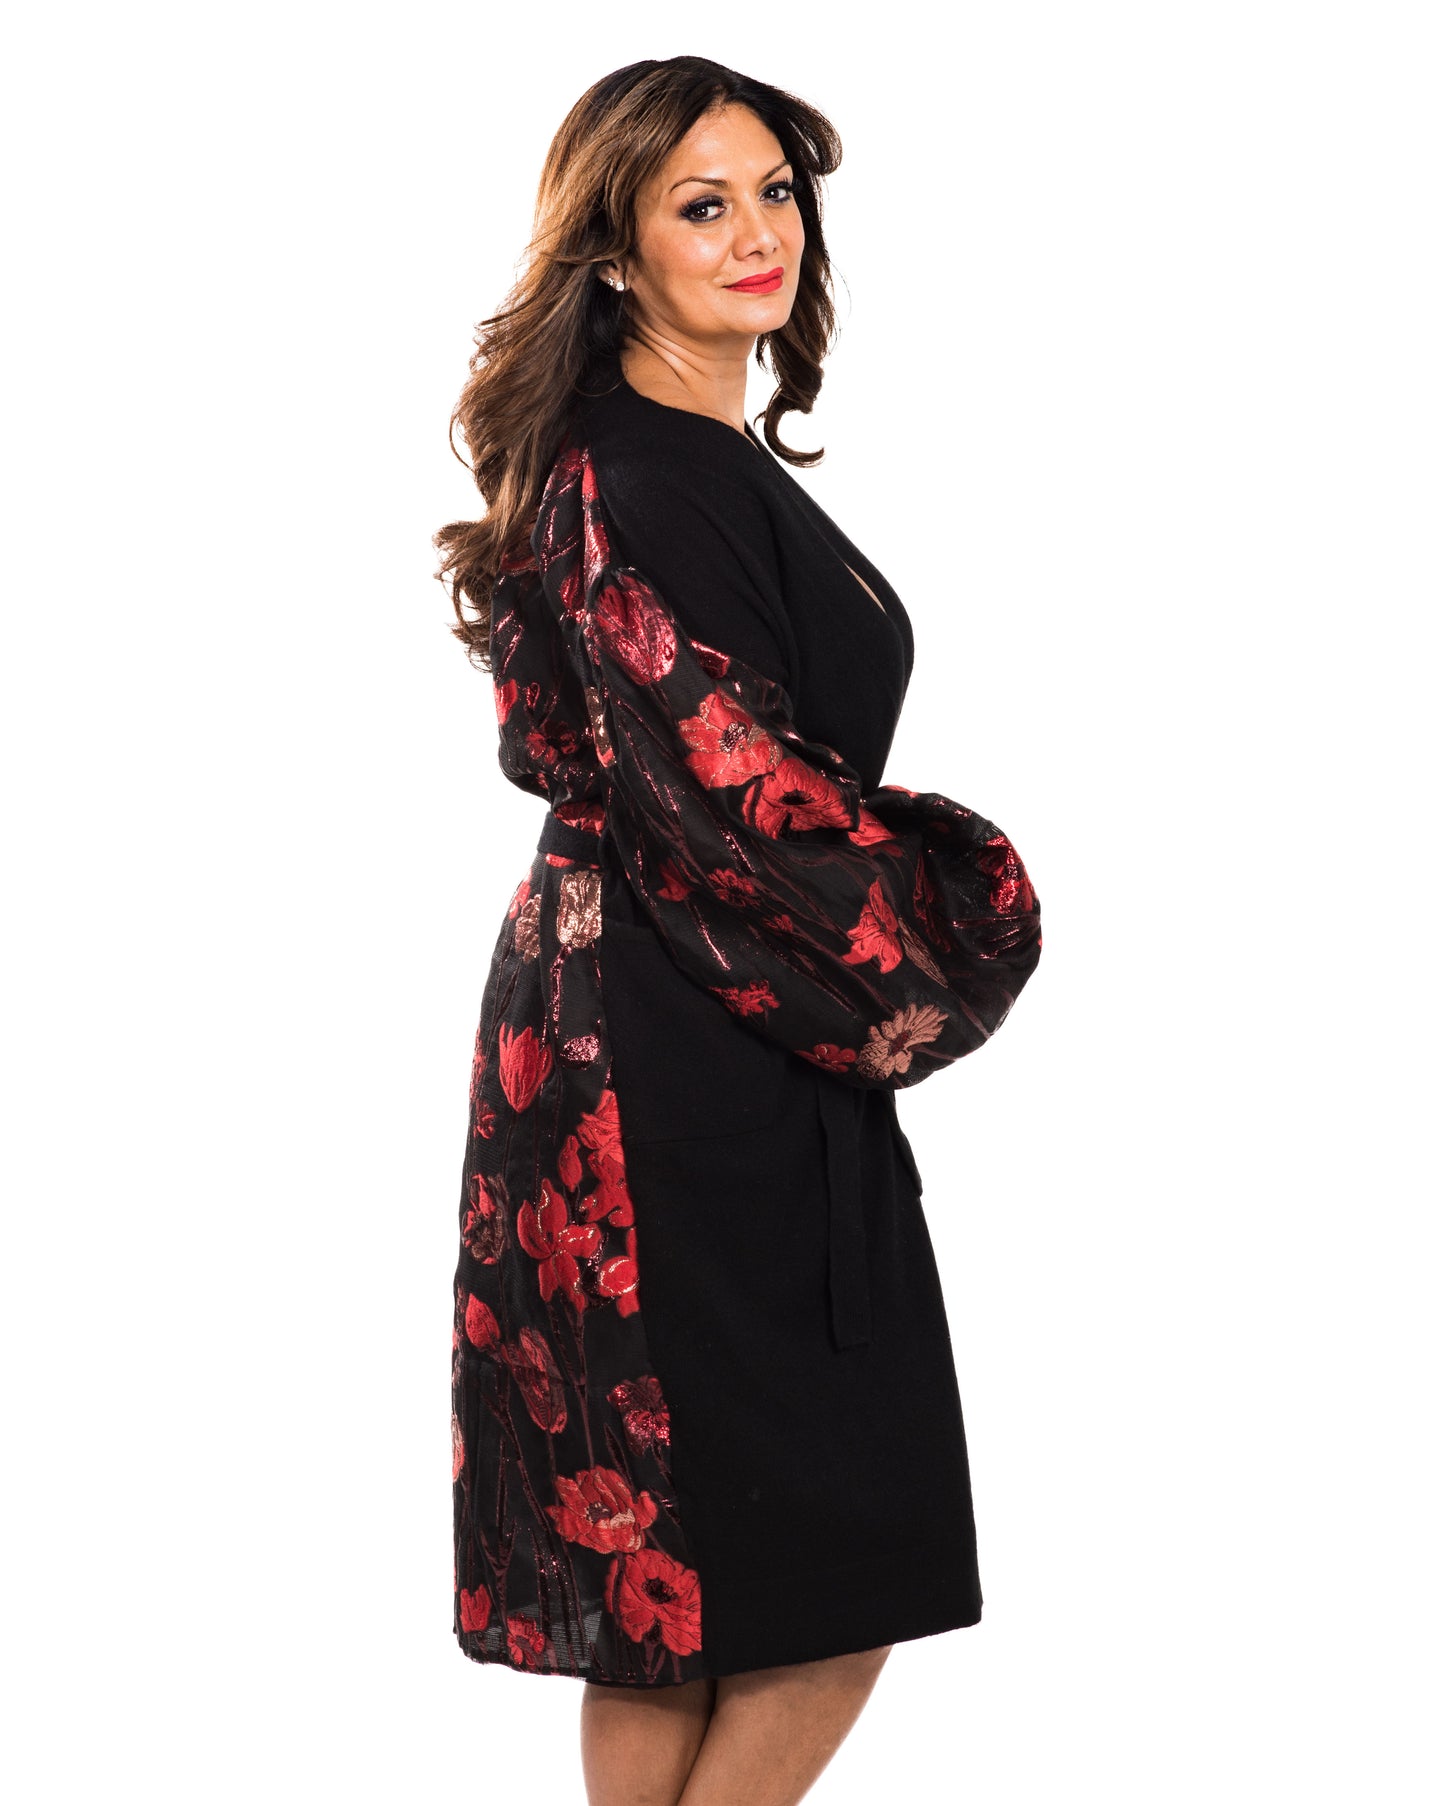 MEDIUM BLACK LONG SLEEVE CASHMERE ROBE WITH BACK AND SLEEVES OF RED METALLIC FLOWERS ON BLACK ORGANZA